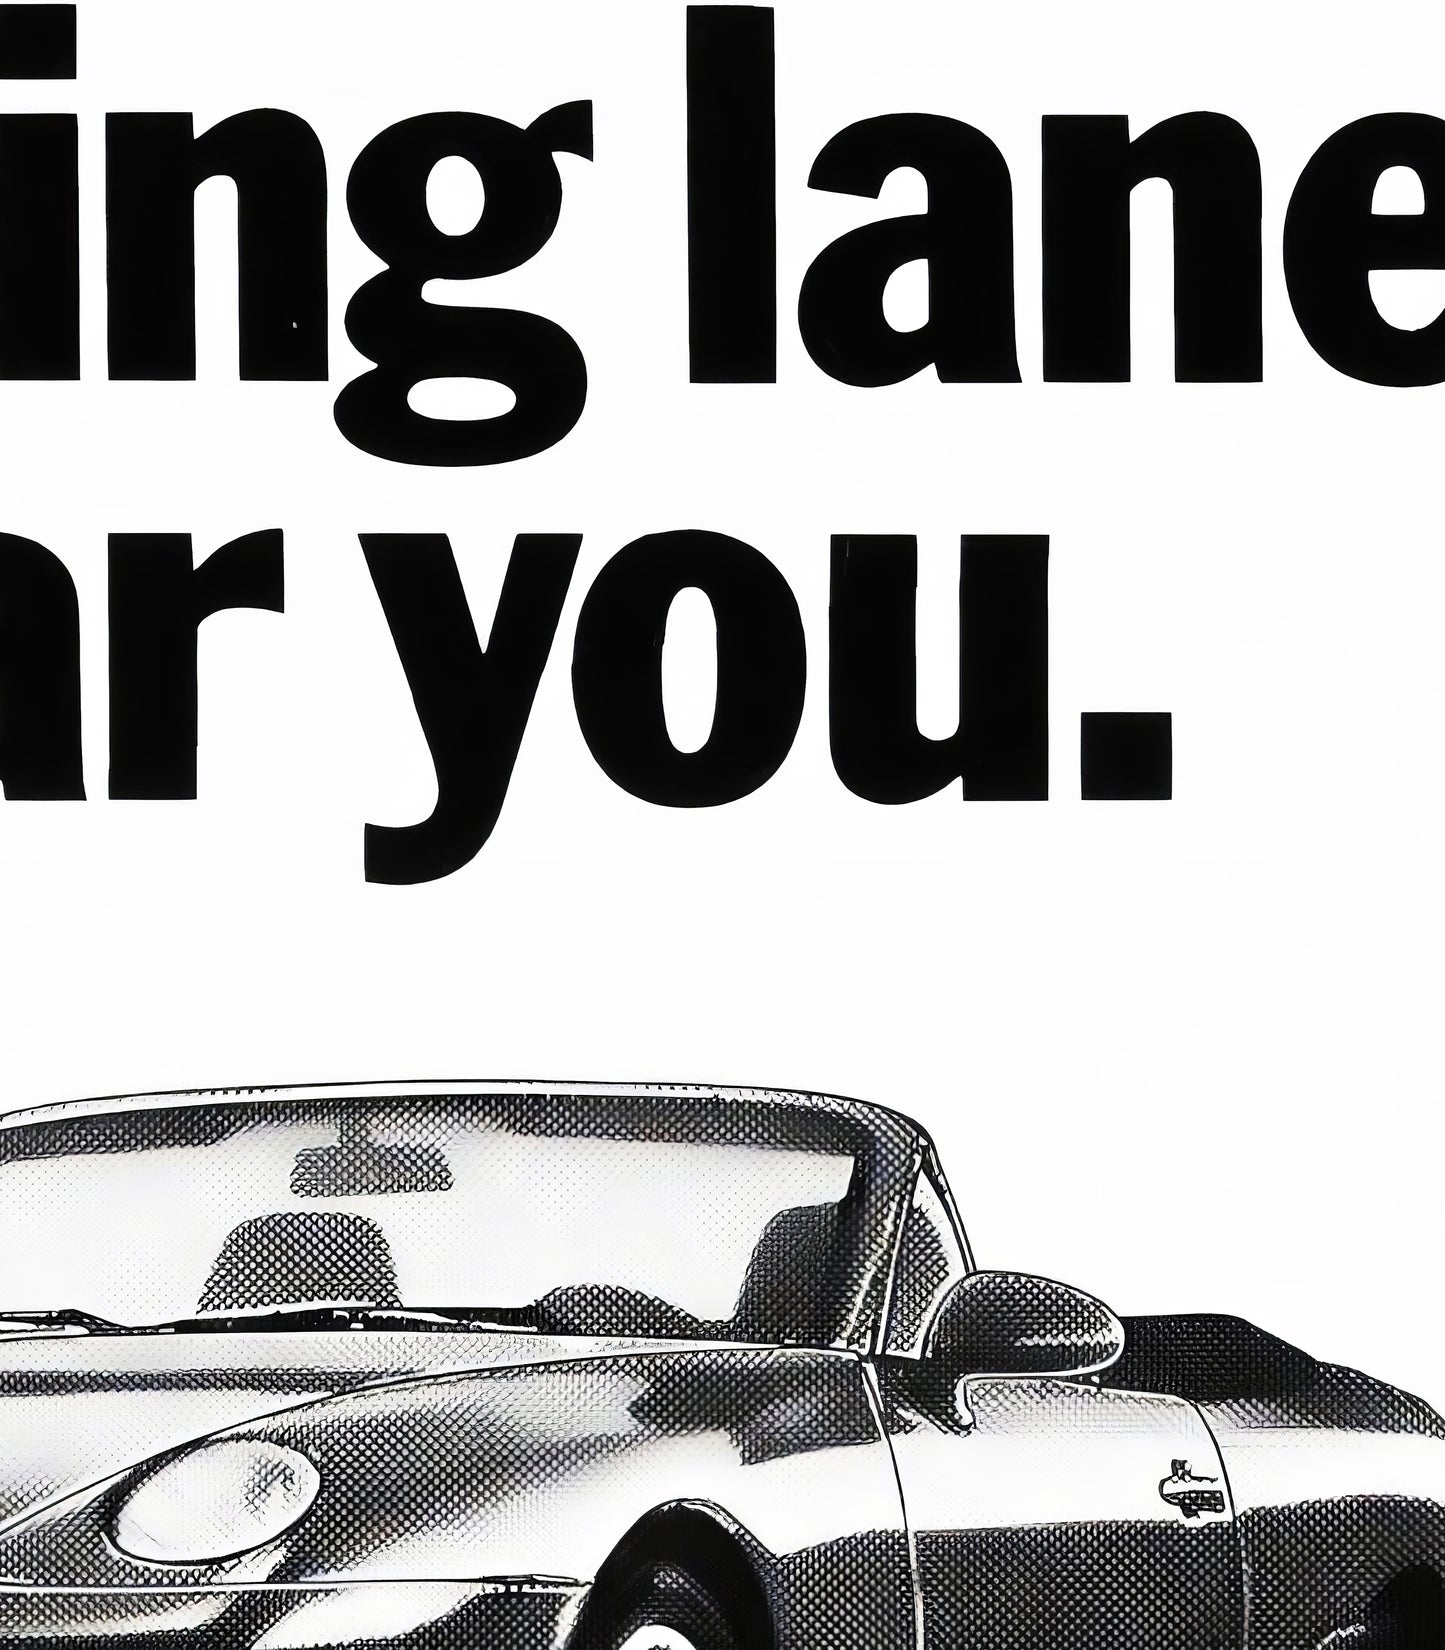 Porsche "Appearing Soon In A Passing Lane Near You" Poster